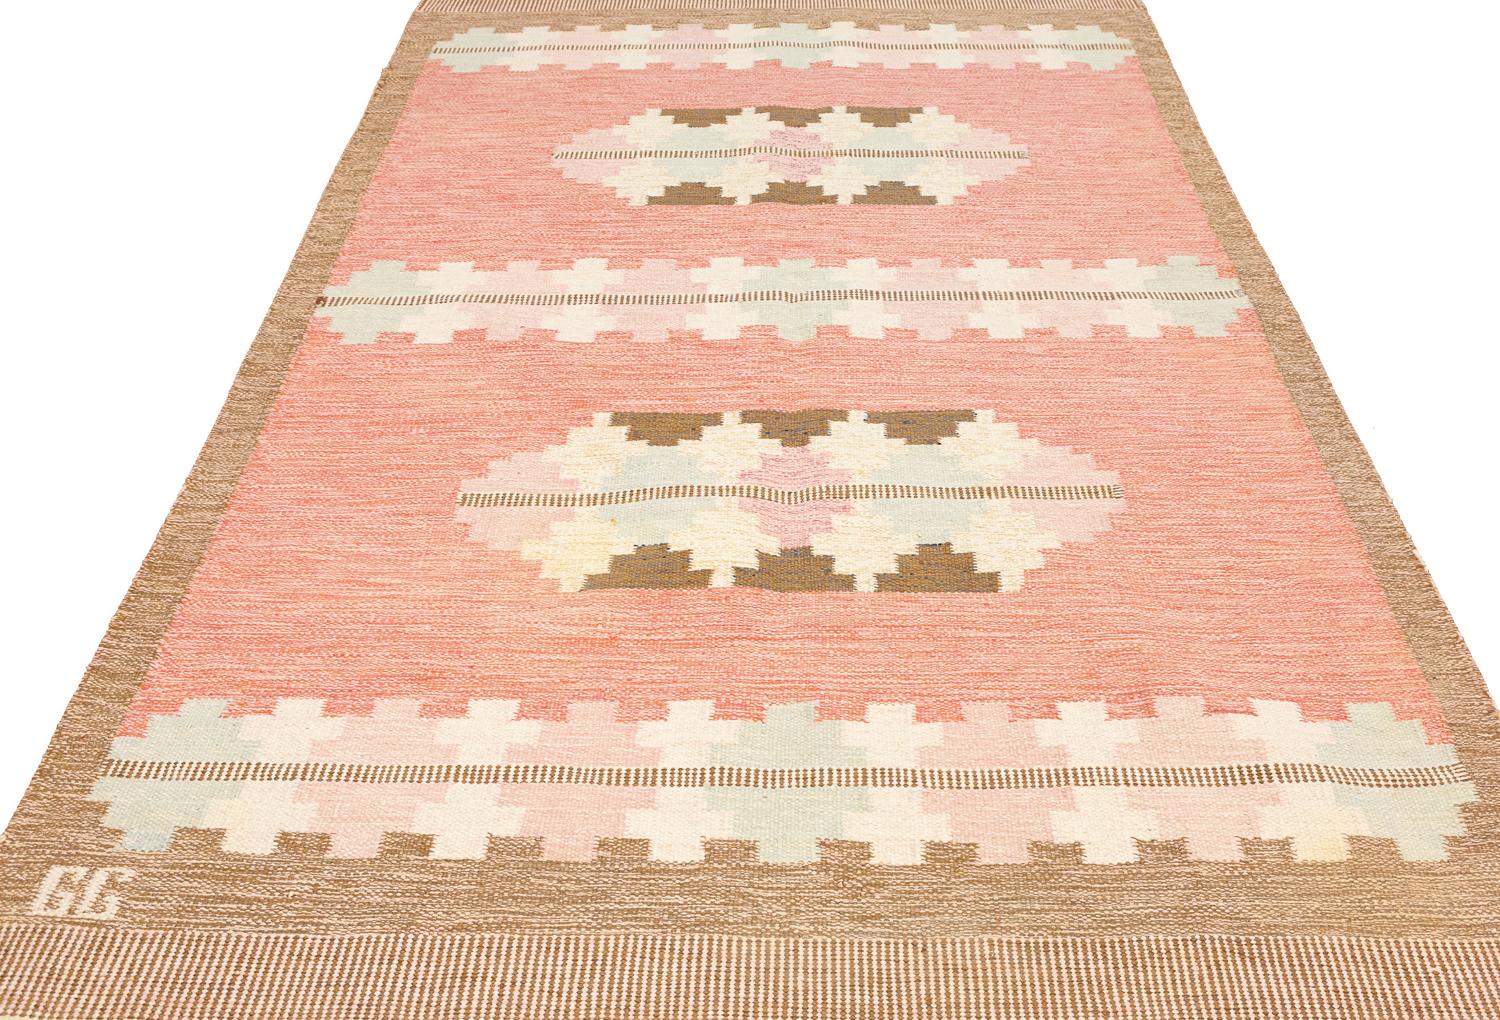 This is a semi-antique Swedish kilim woven circa 1950 and it measures 235 X 162 cm. It bares initial of GG (Gitt Grannsjo Carlsson) with a beautiful soft pastel color palette and geometric cross motifs design. An elegant and attractive piece.